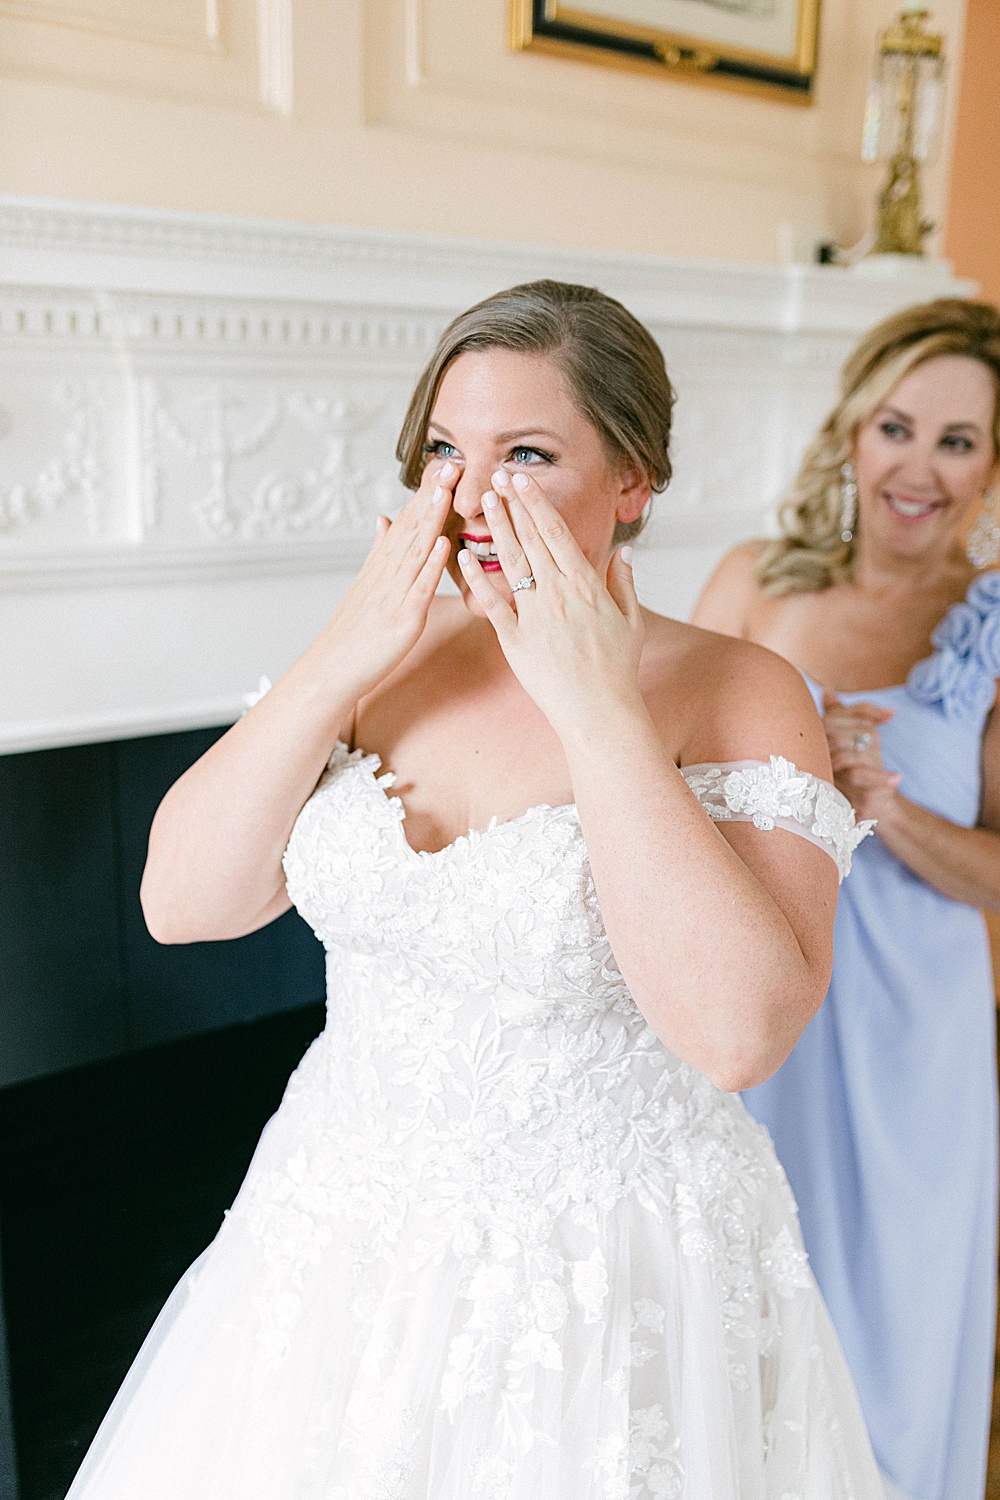 bride getting emotional as she puts on her wedding dress